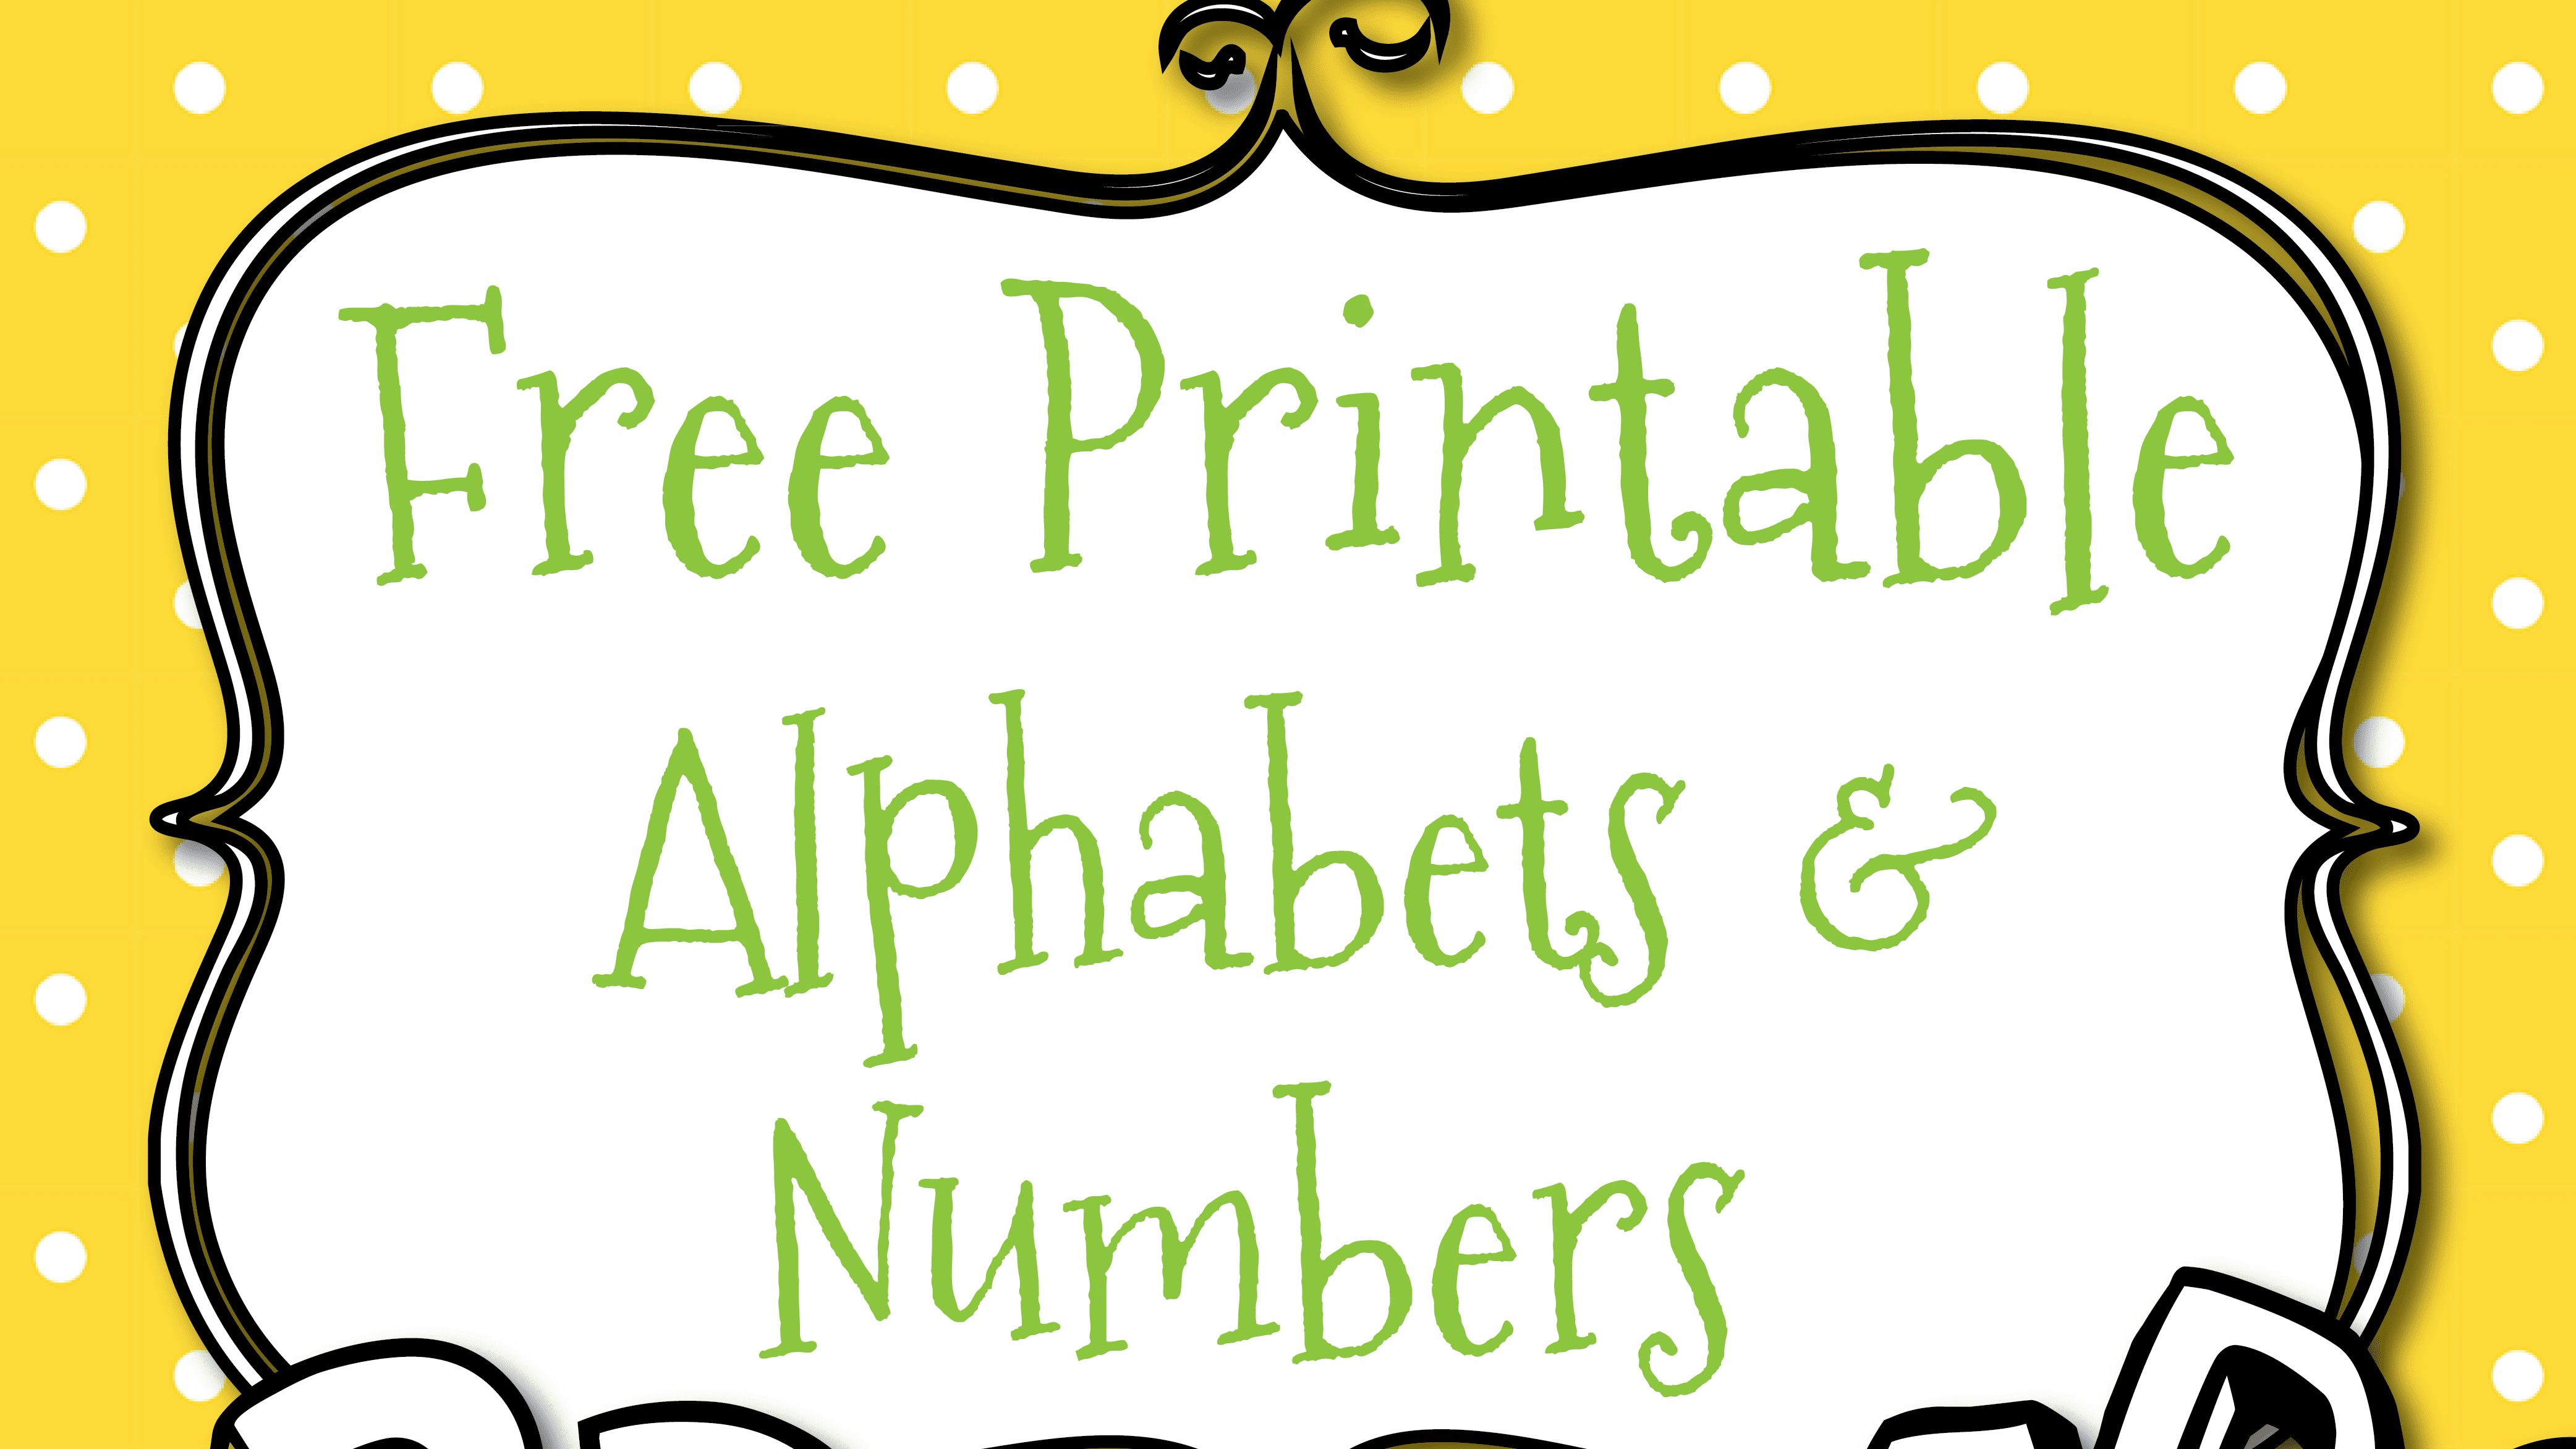 Free Printable Letters And Numbers For Crafts - Free Printable Letters And Numbers